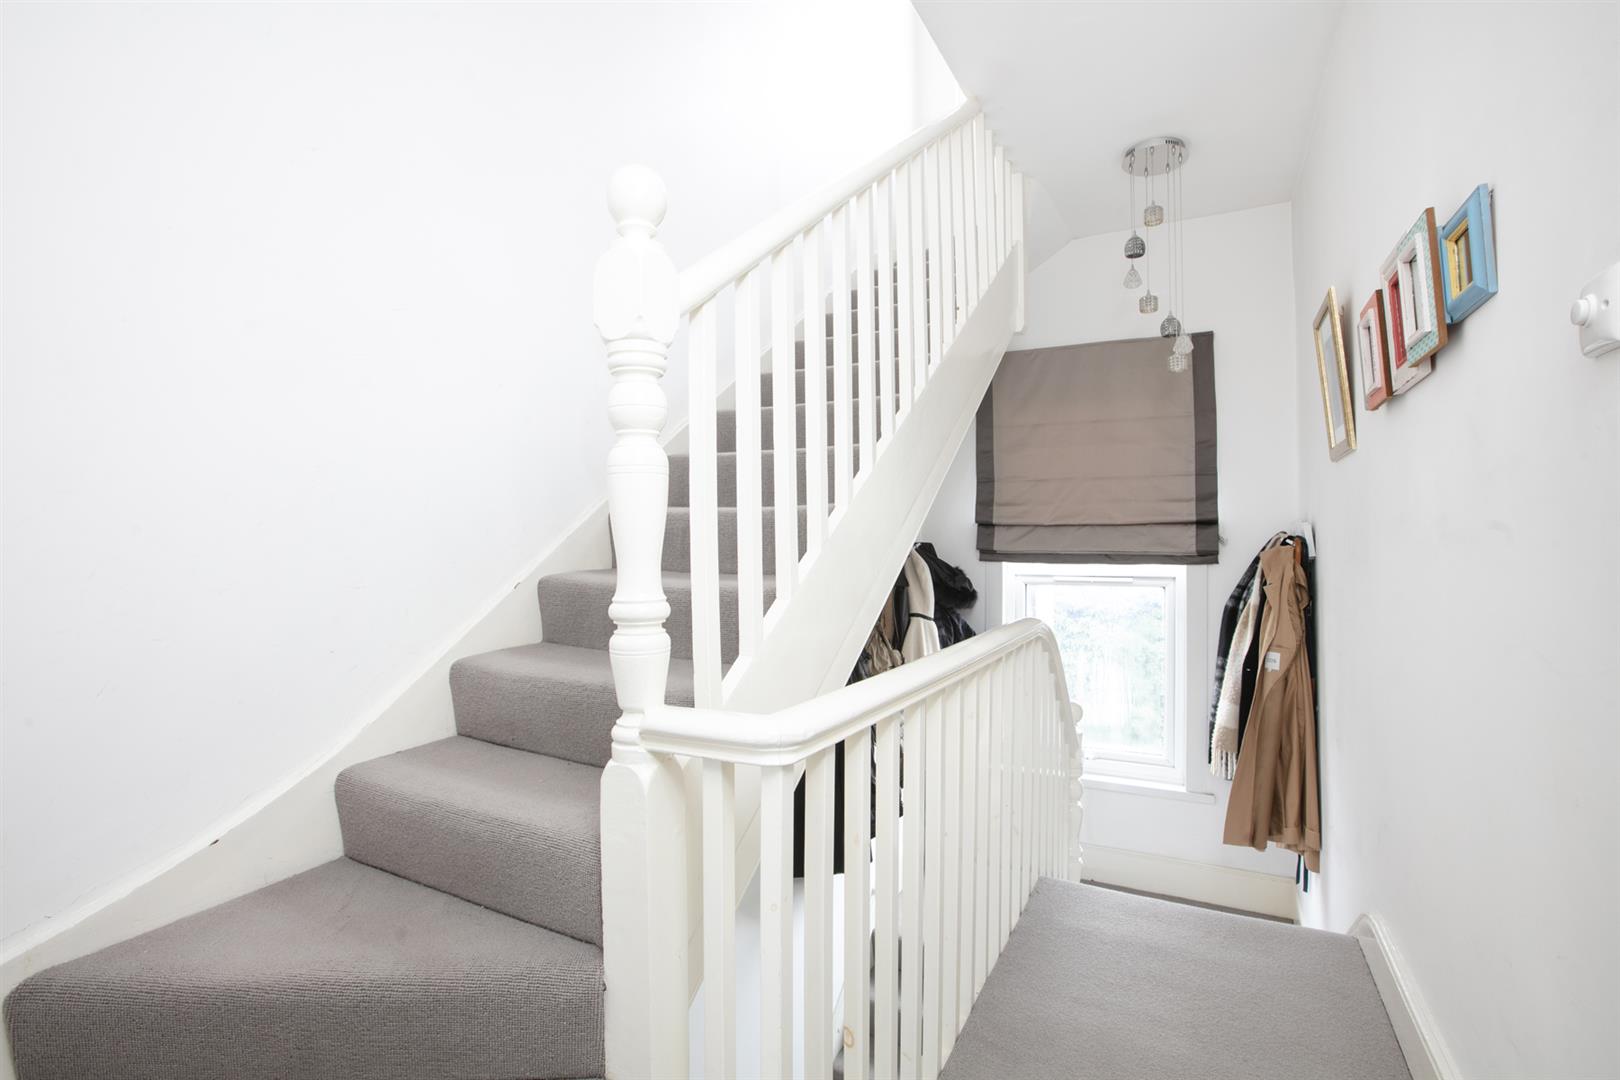 Flat - Conversion For Sale in Coldharbour Lane, Camberwell, SE5 1178 view6